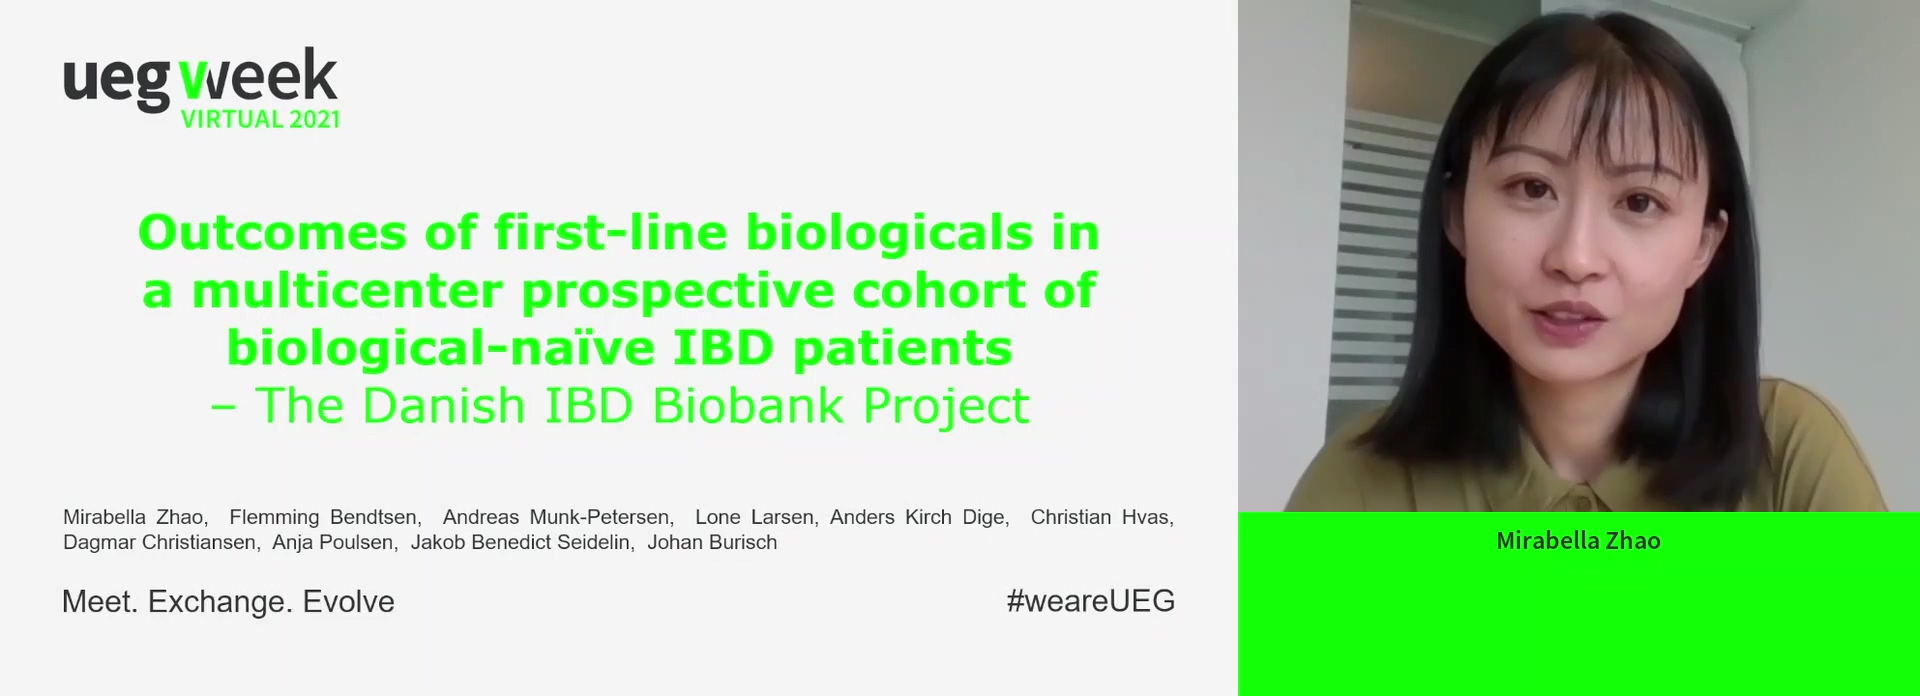 OUTCOMES OF FIRST-LINE BIOLOGICALS IN A MULTICENTER PROSPECTIVE COHORT OF BIOLOGICAL-NAÏVE IBD PATIENTS – THE DANISH IBD BIOBANK PROJECT